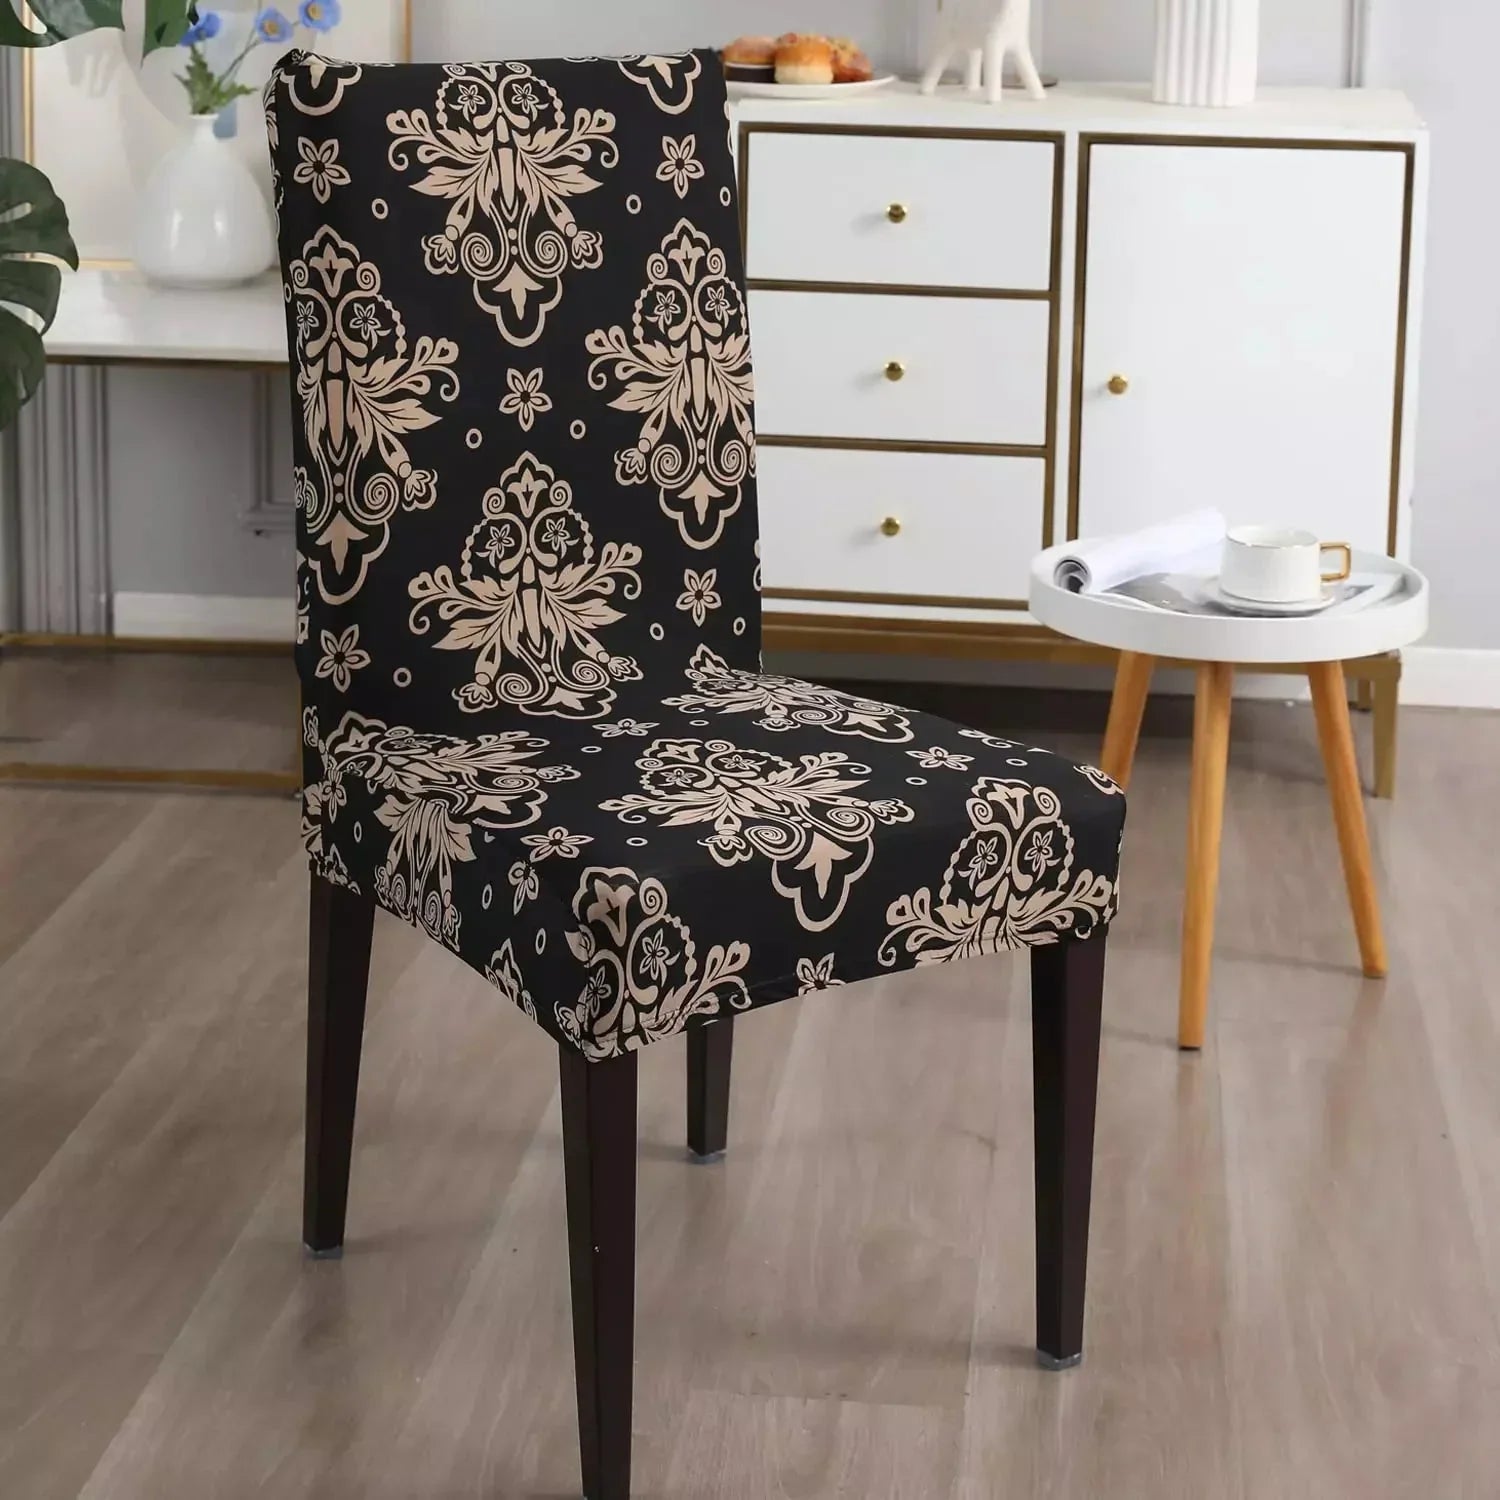 STRETCHABLE CHAIR COVERS, MEROON FLORAL - Fab Home Decor - Sofa Cover